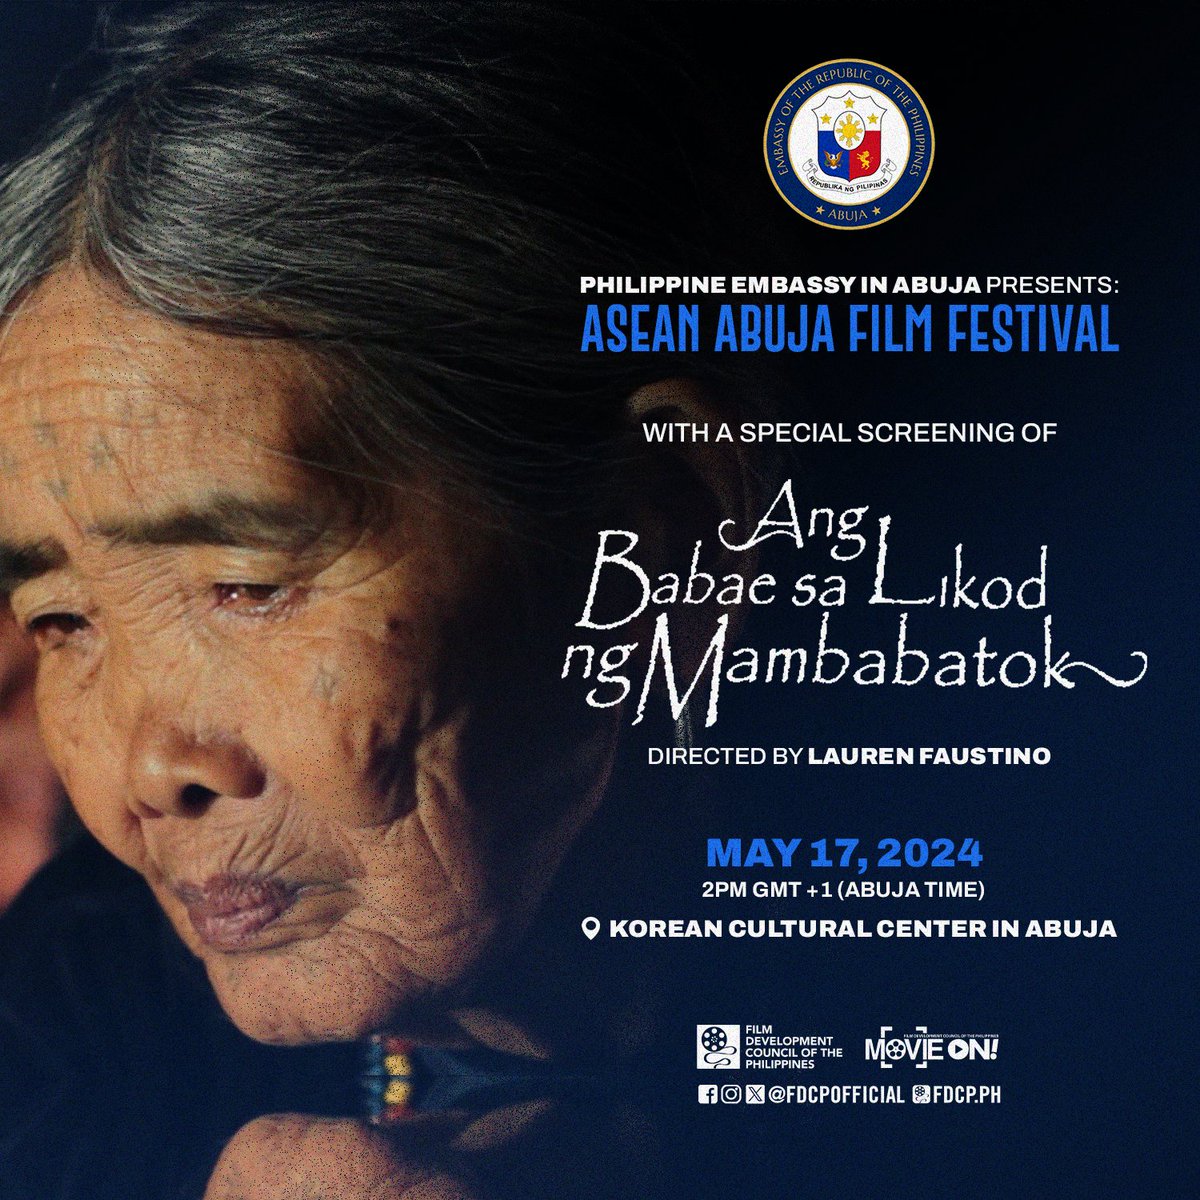 FILIPINO FILM SCREENING IN ABUJA! The Film Development Council of the Philippines (FDCP) is partnering with The Philippine Embassy in Abuja for the screening of Lauren Faustino’s “Ang Babae sa Likod ng Mambabatok” (2012) on May 17 in Abuja, Nigeria. 

#PEAP #FDCP